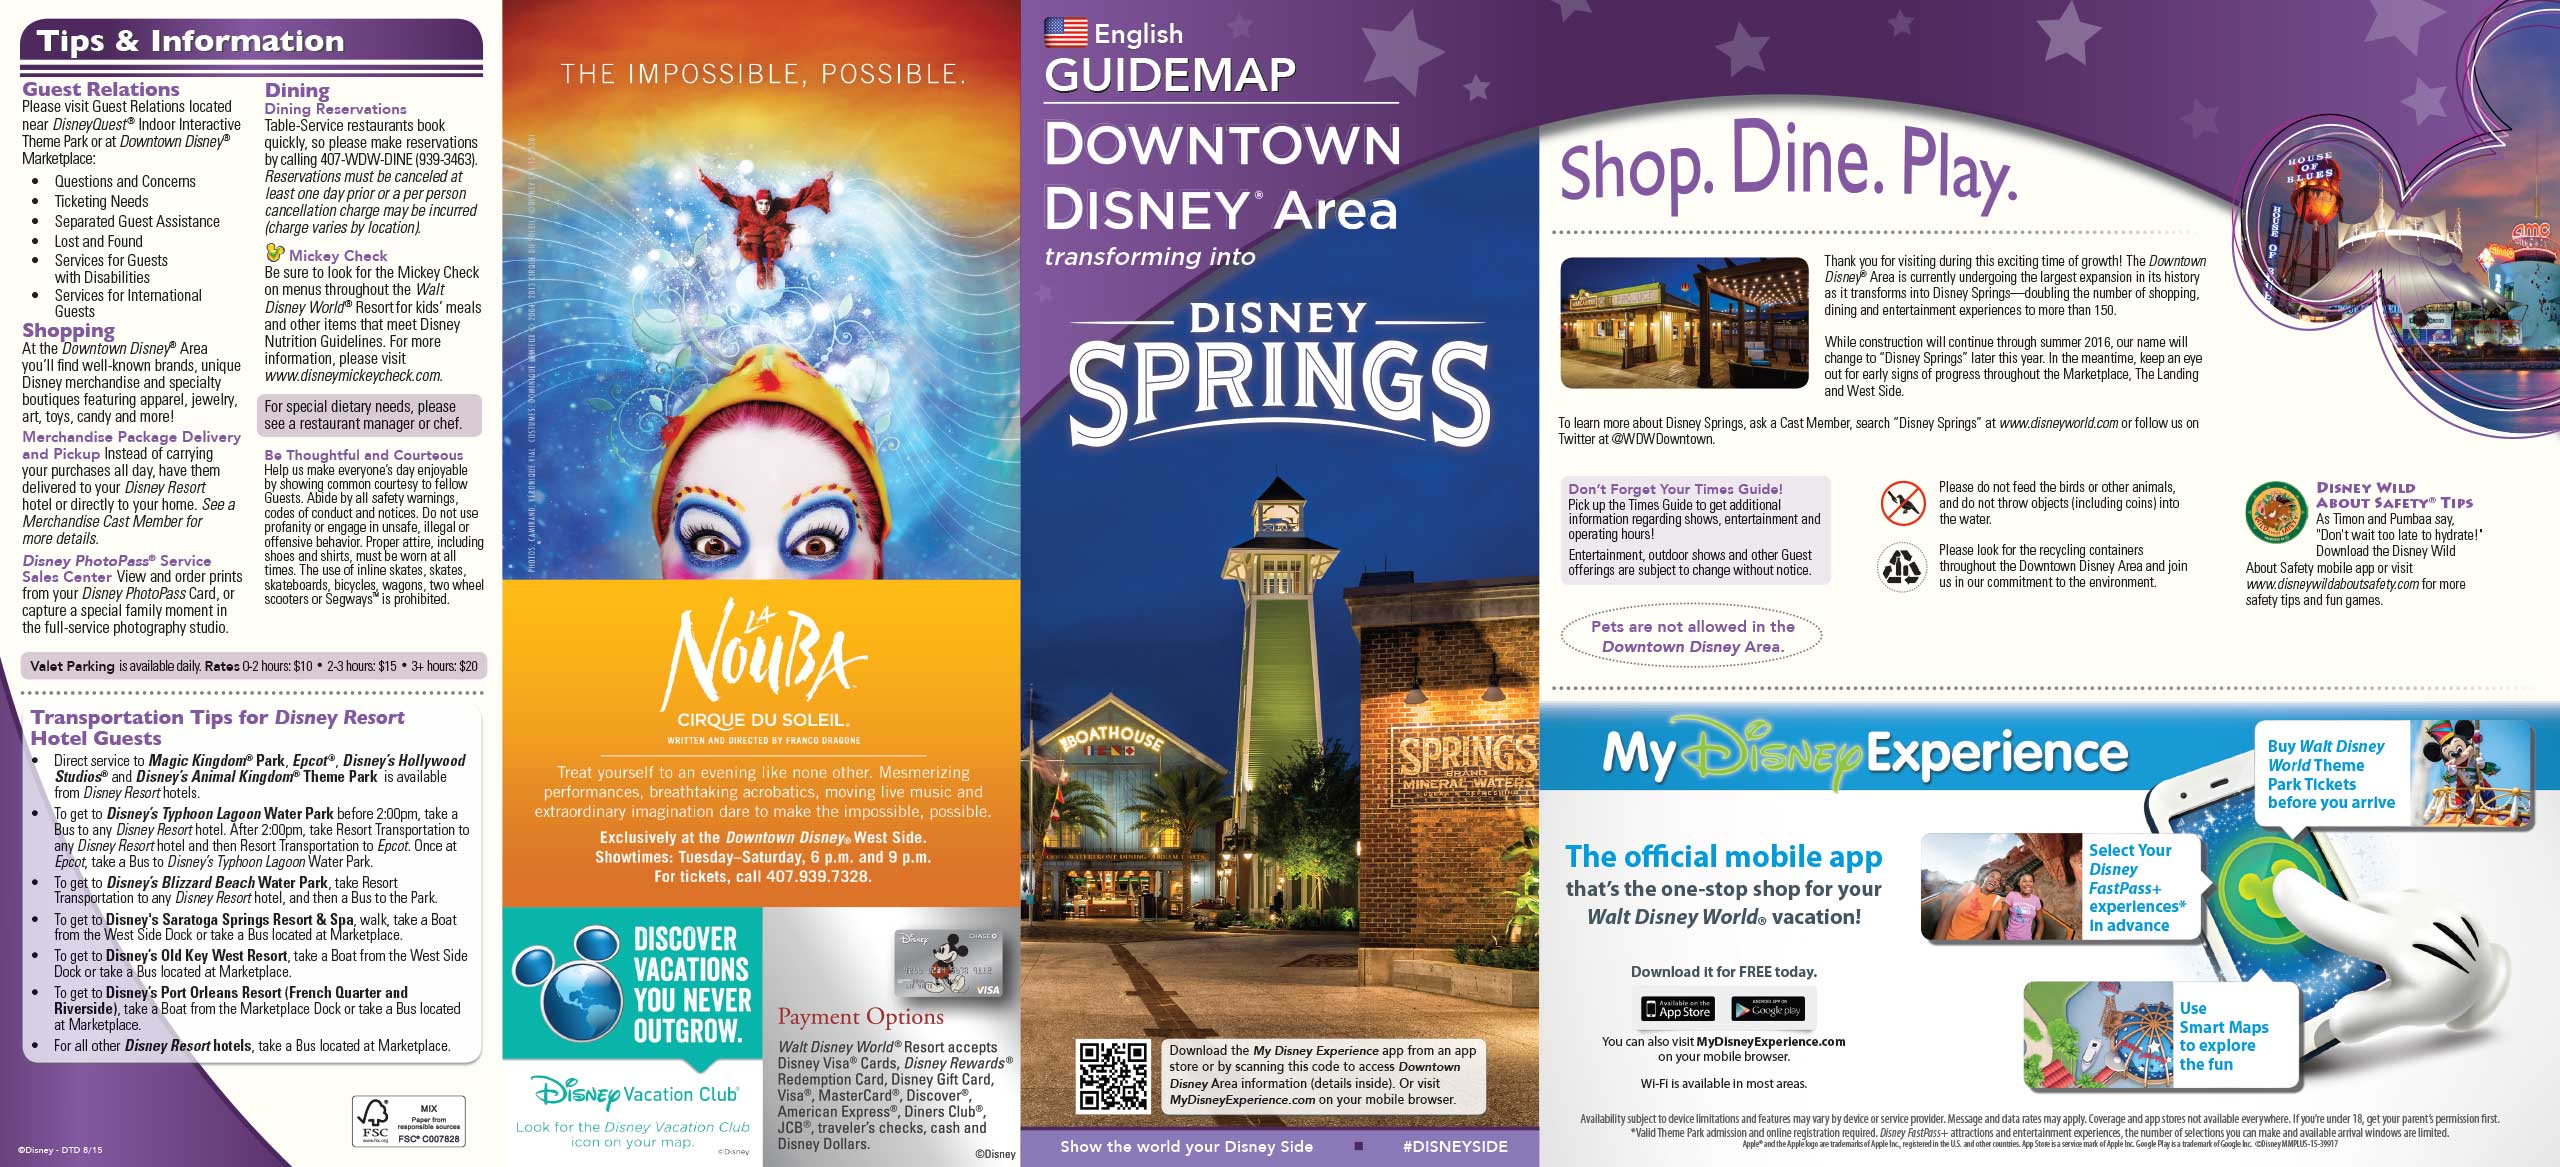 Photos New Downtown Disney Guide Map Includes Disney Springs Name And New Restaurants 3302